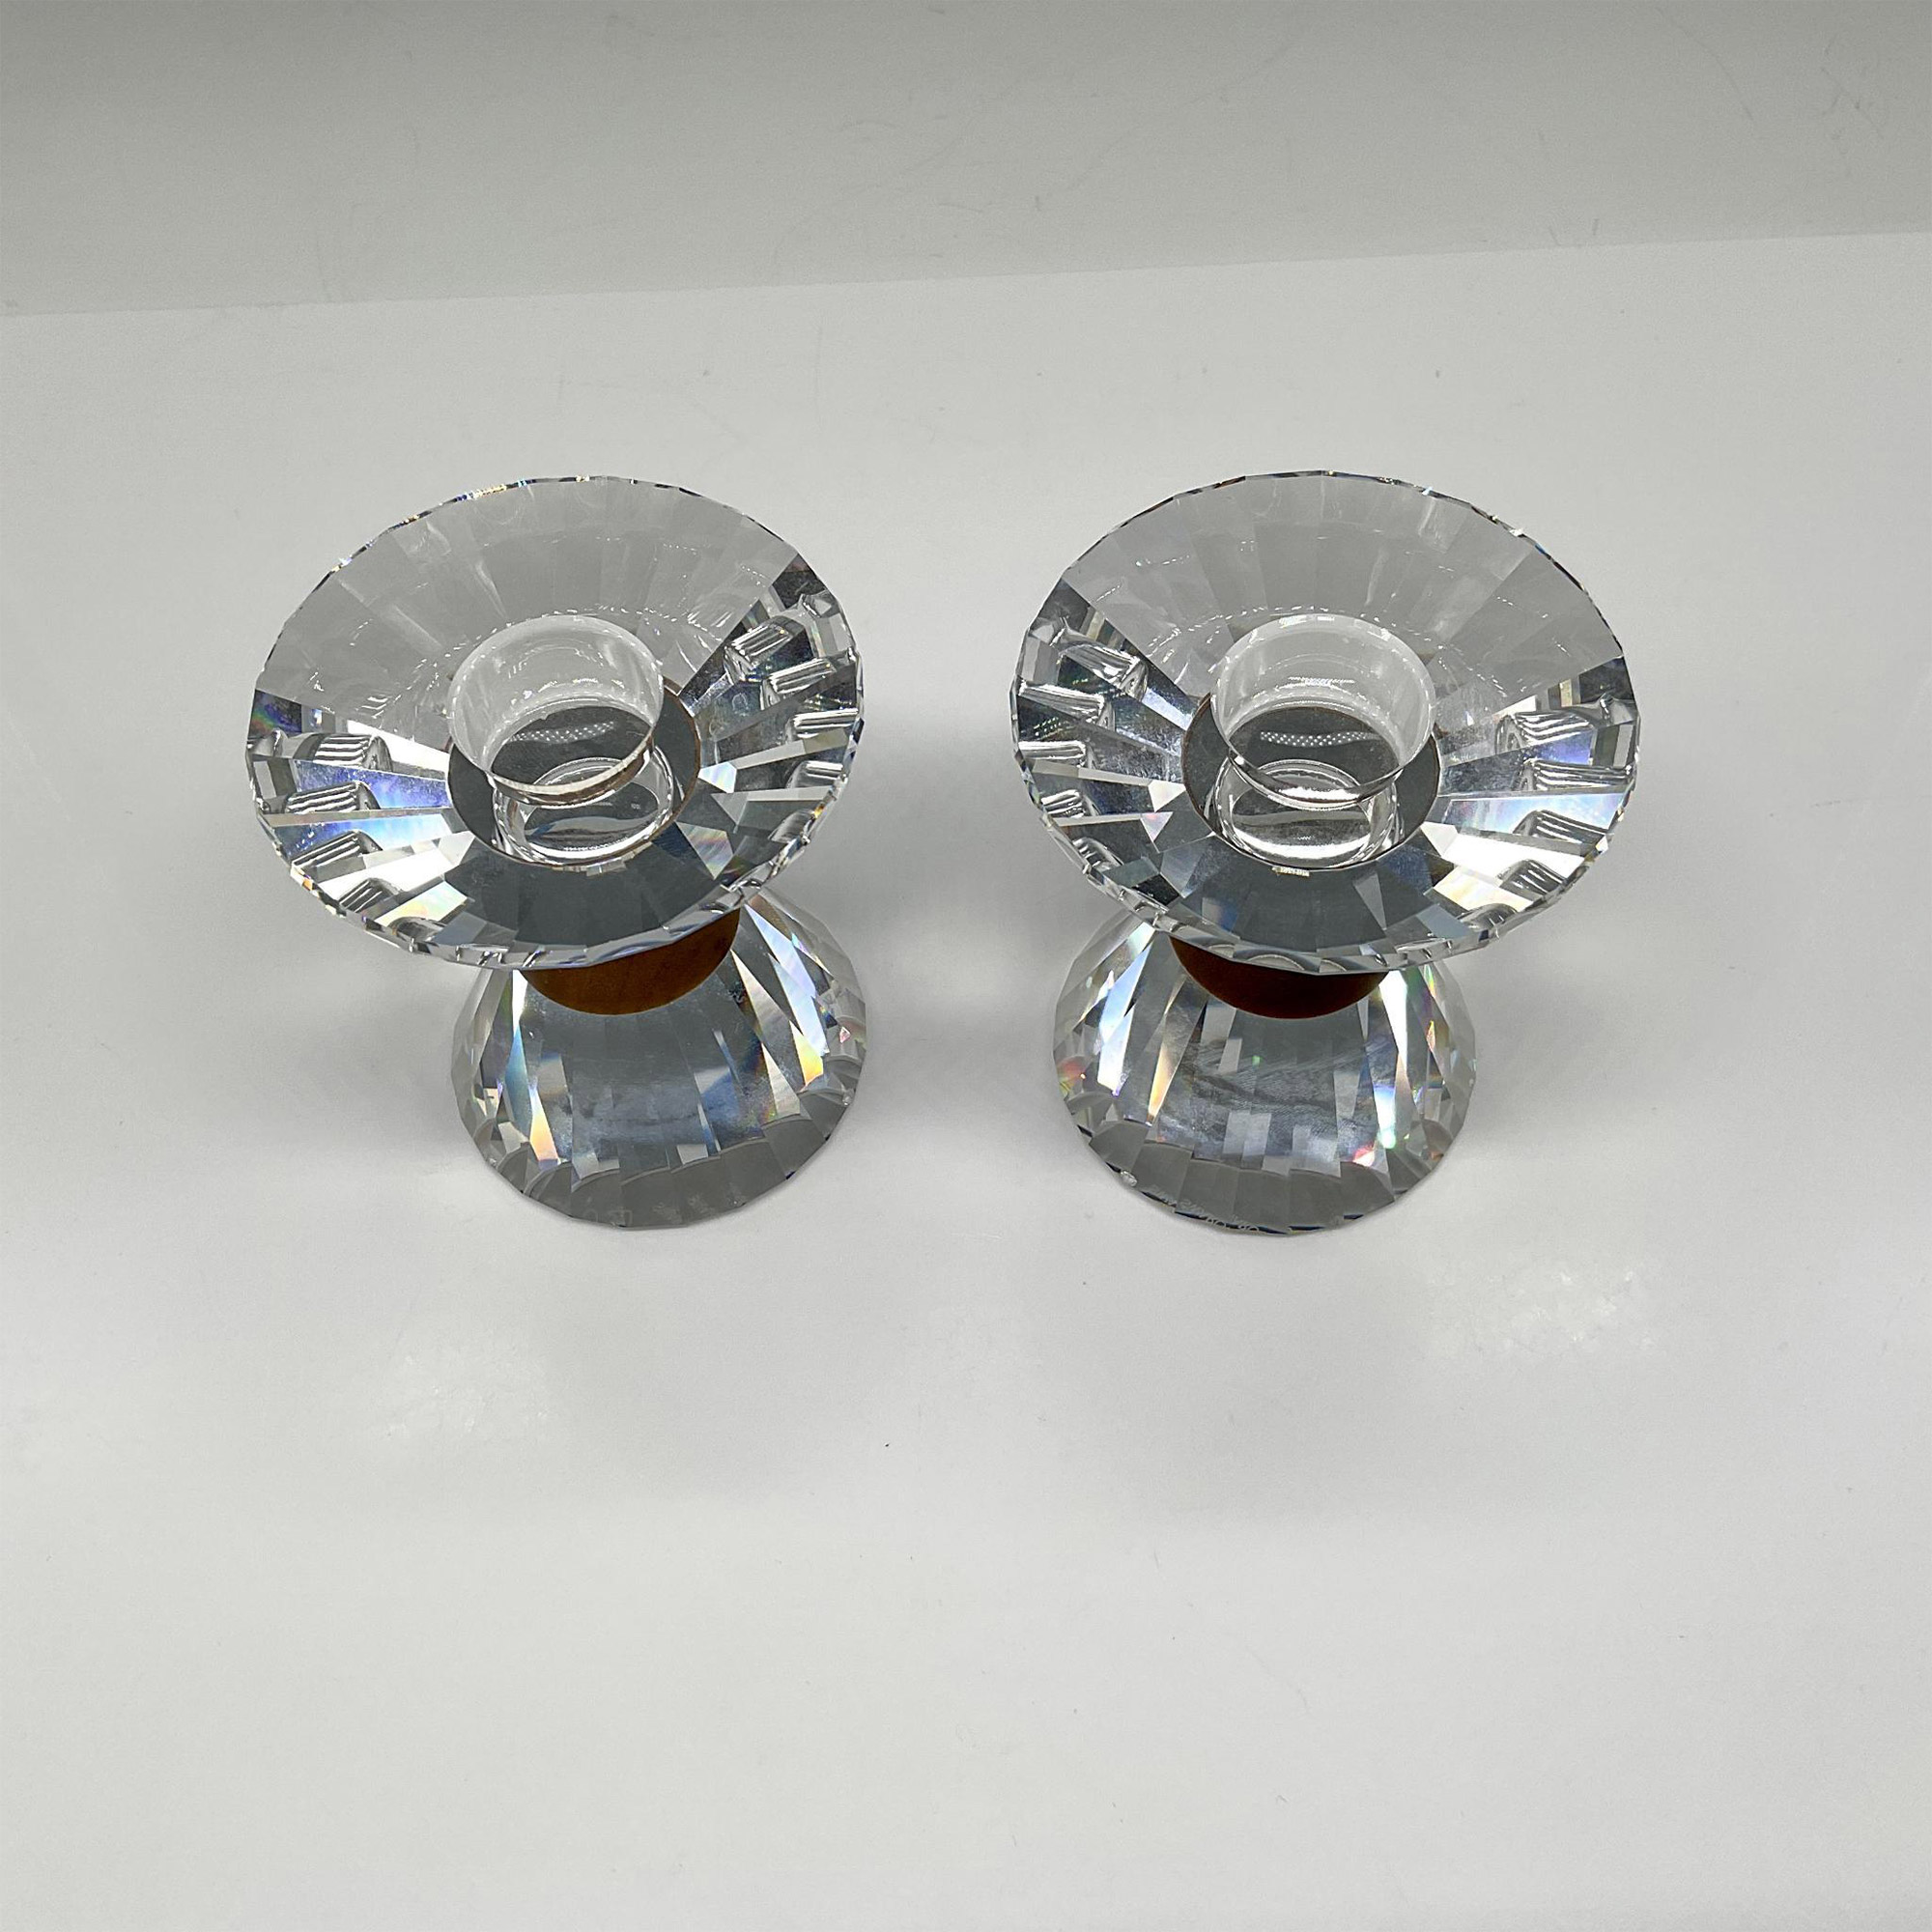 2pc Swarovski Silver Crystal Candle Holders, Colonna - Image 2 of 3